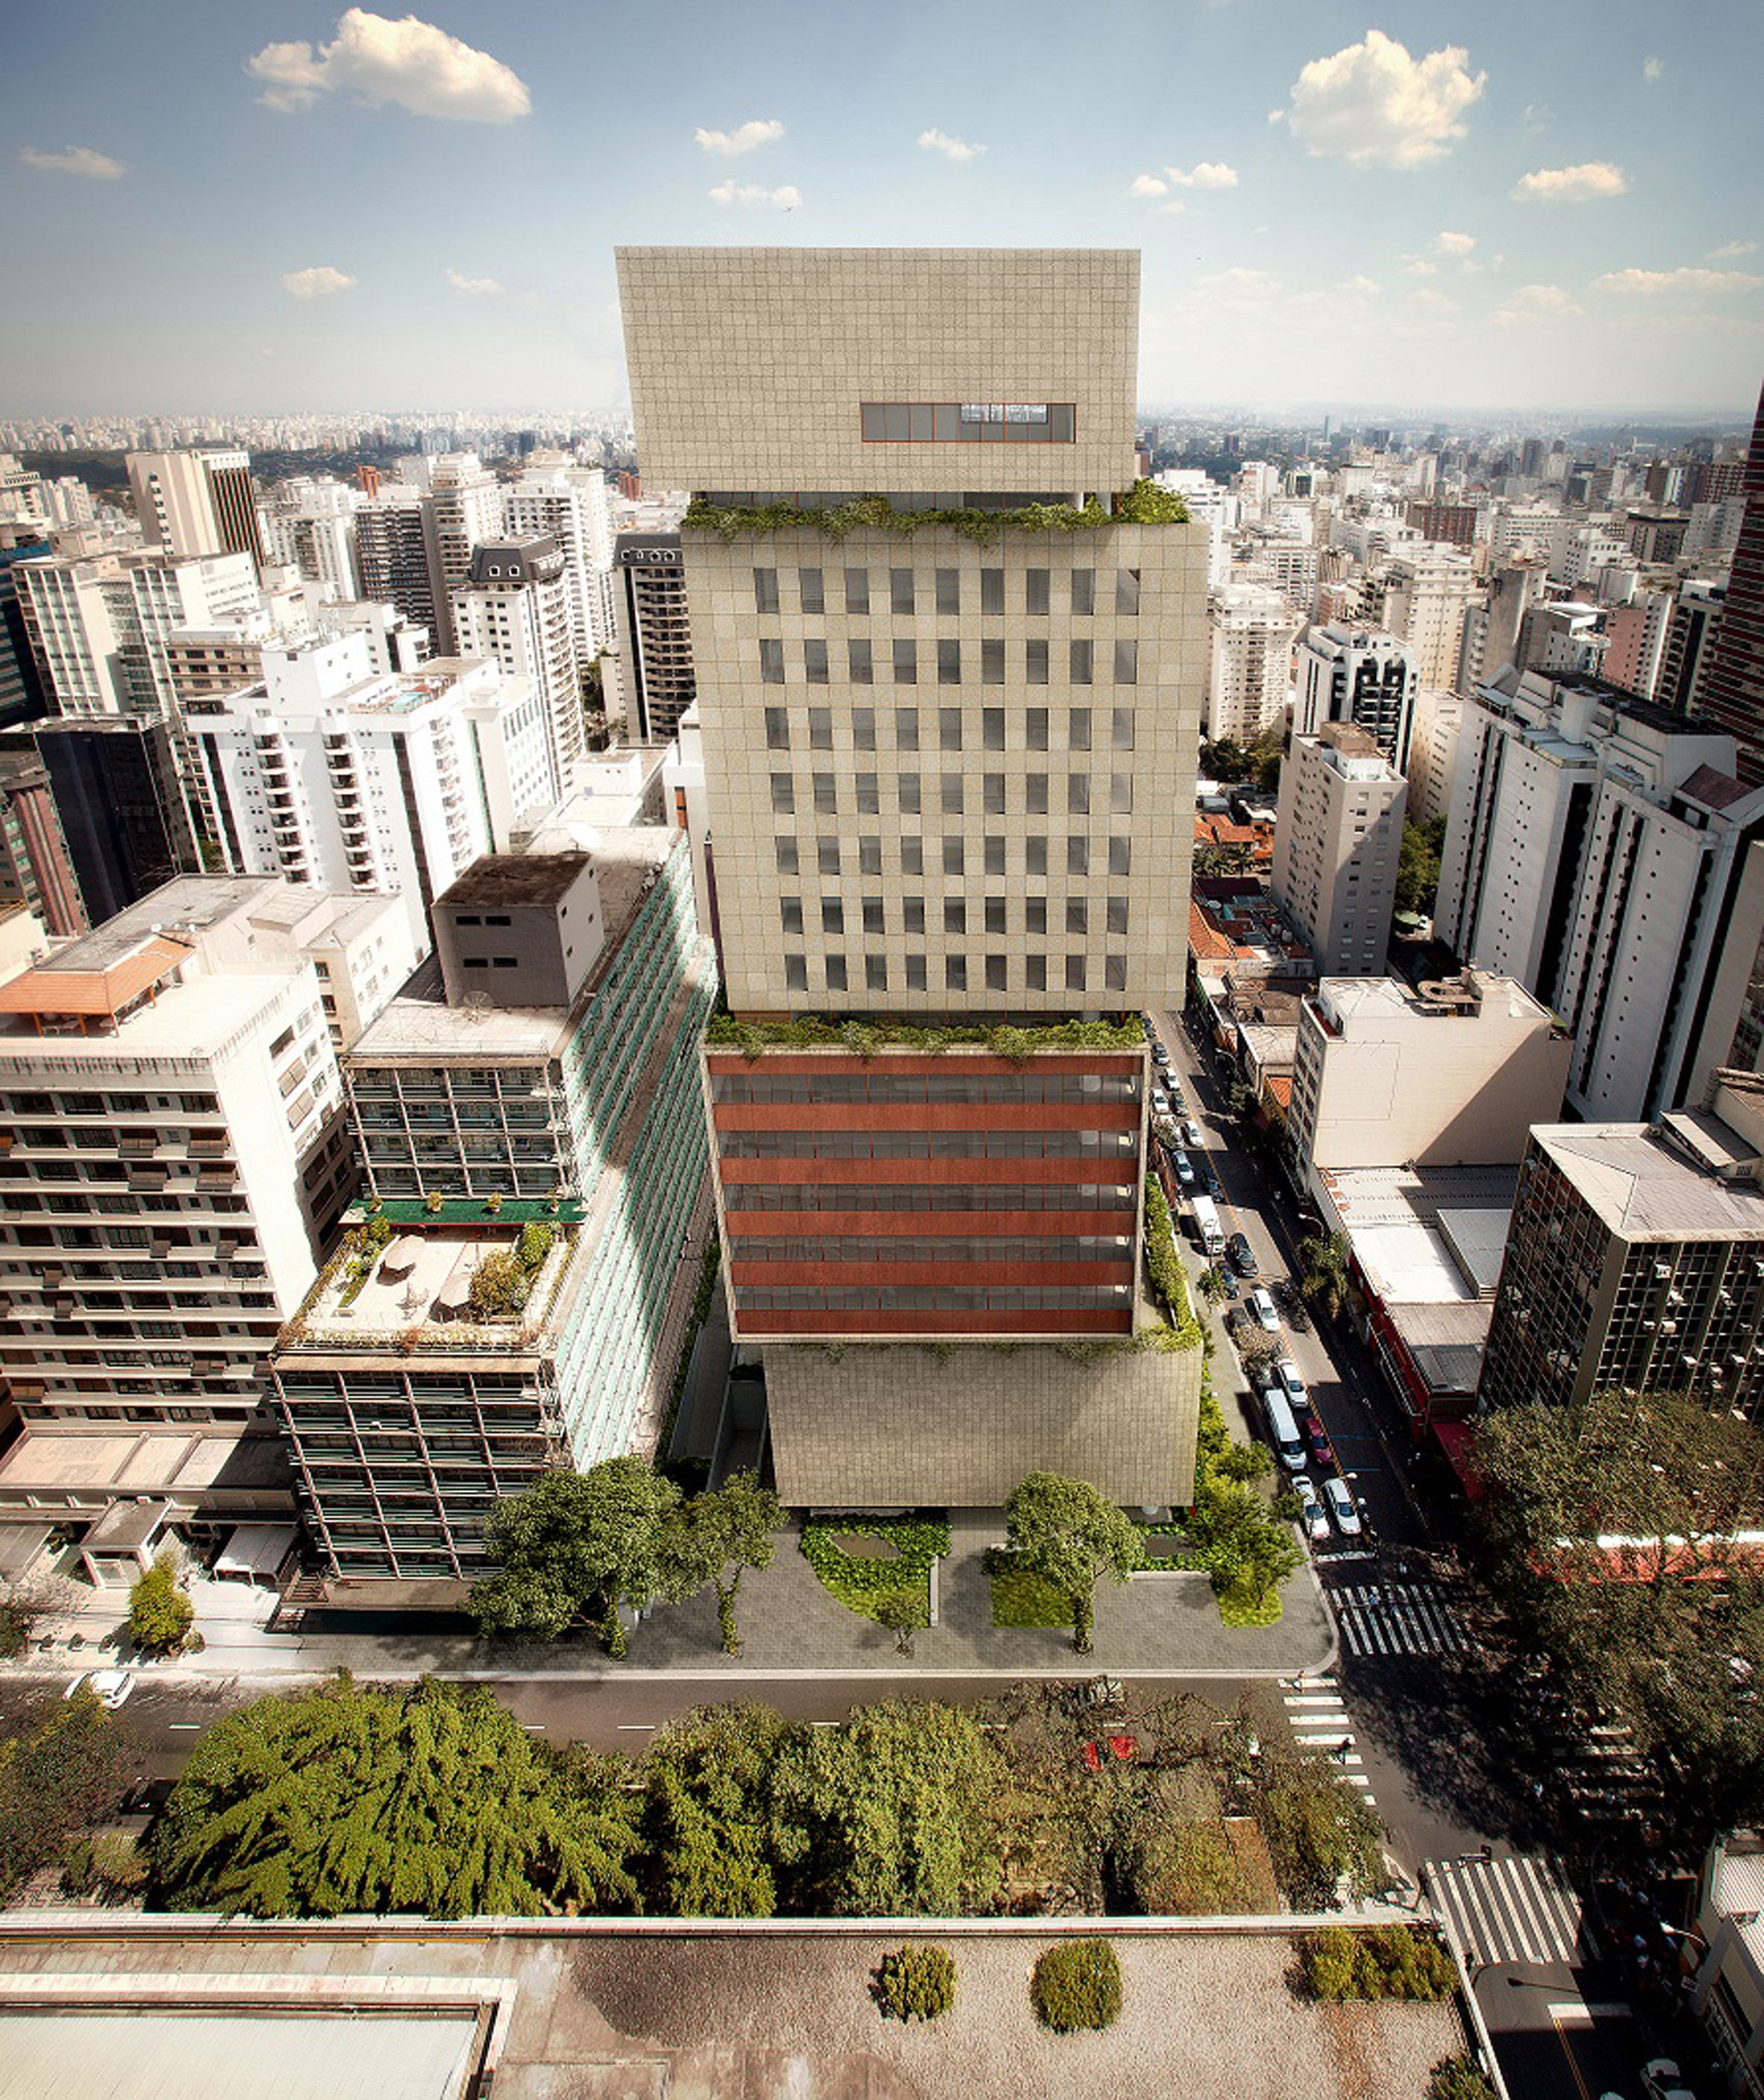 Isay Weinfeld reveals irregularly stacked tower block for São Paulo